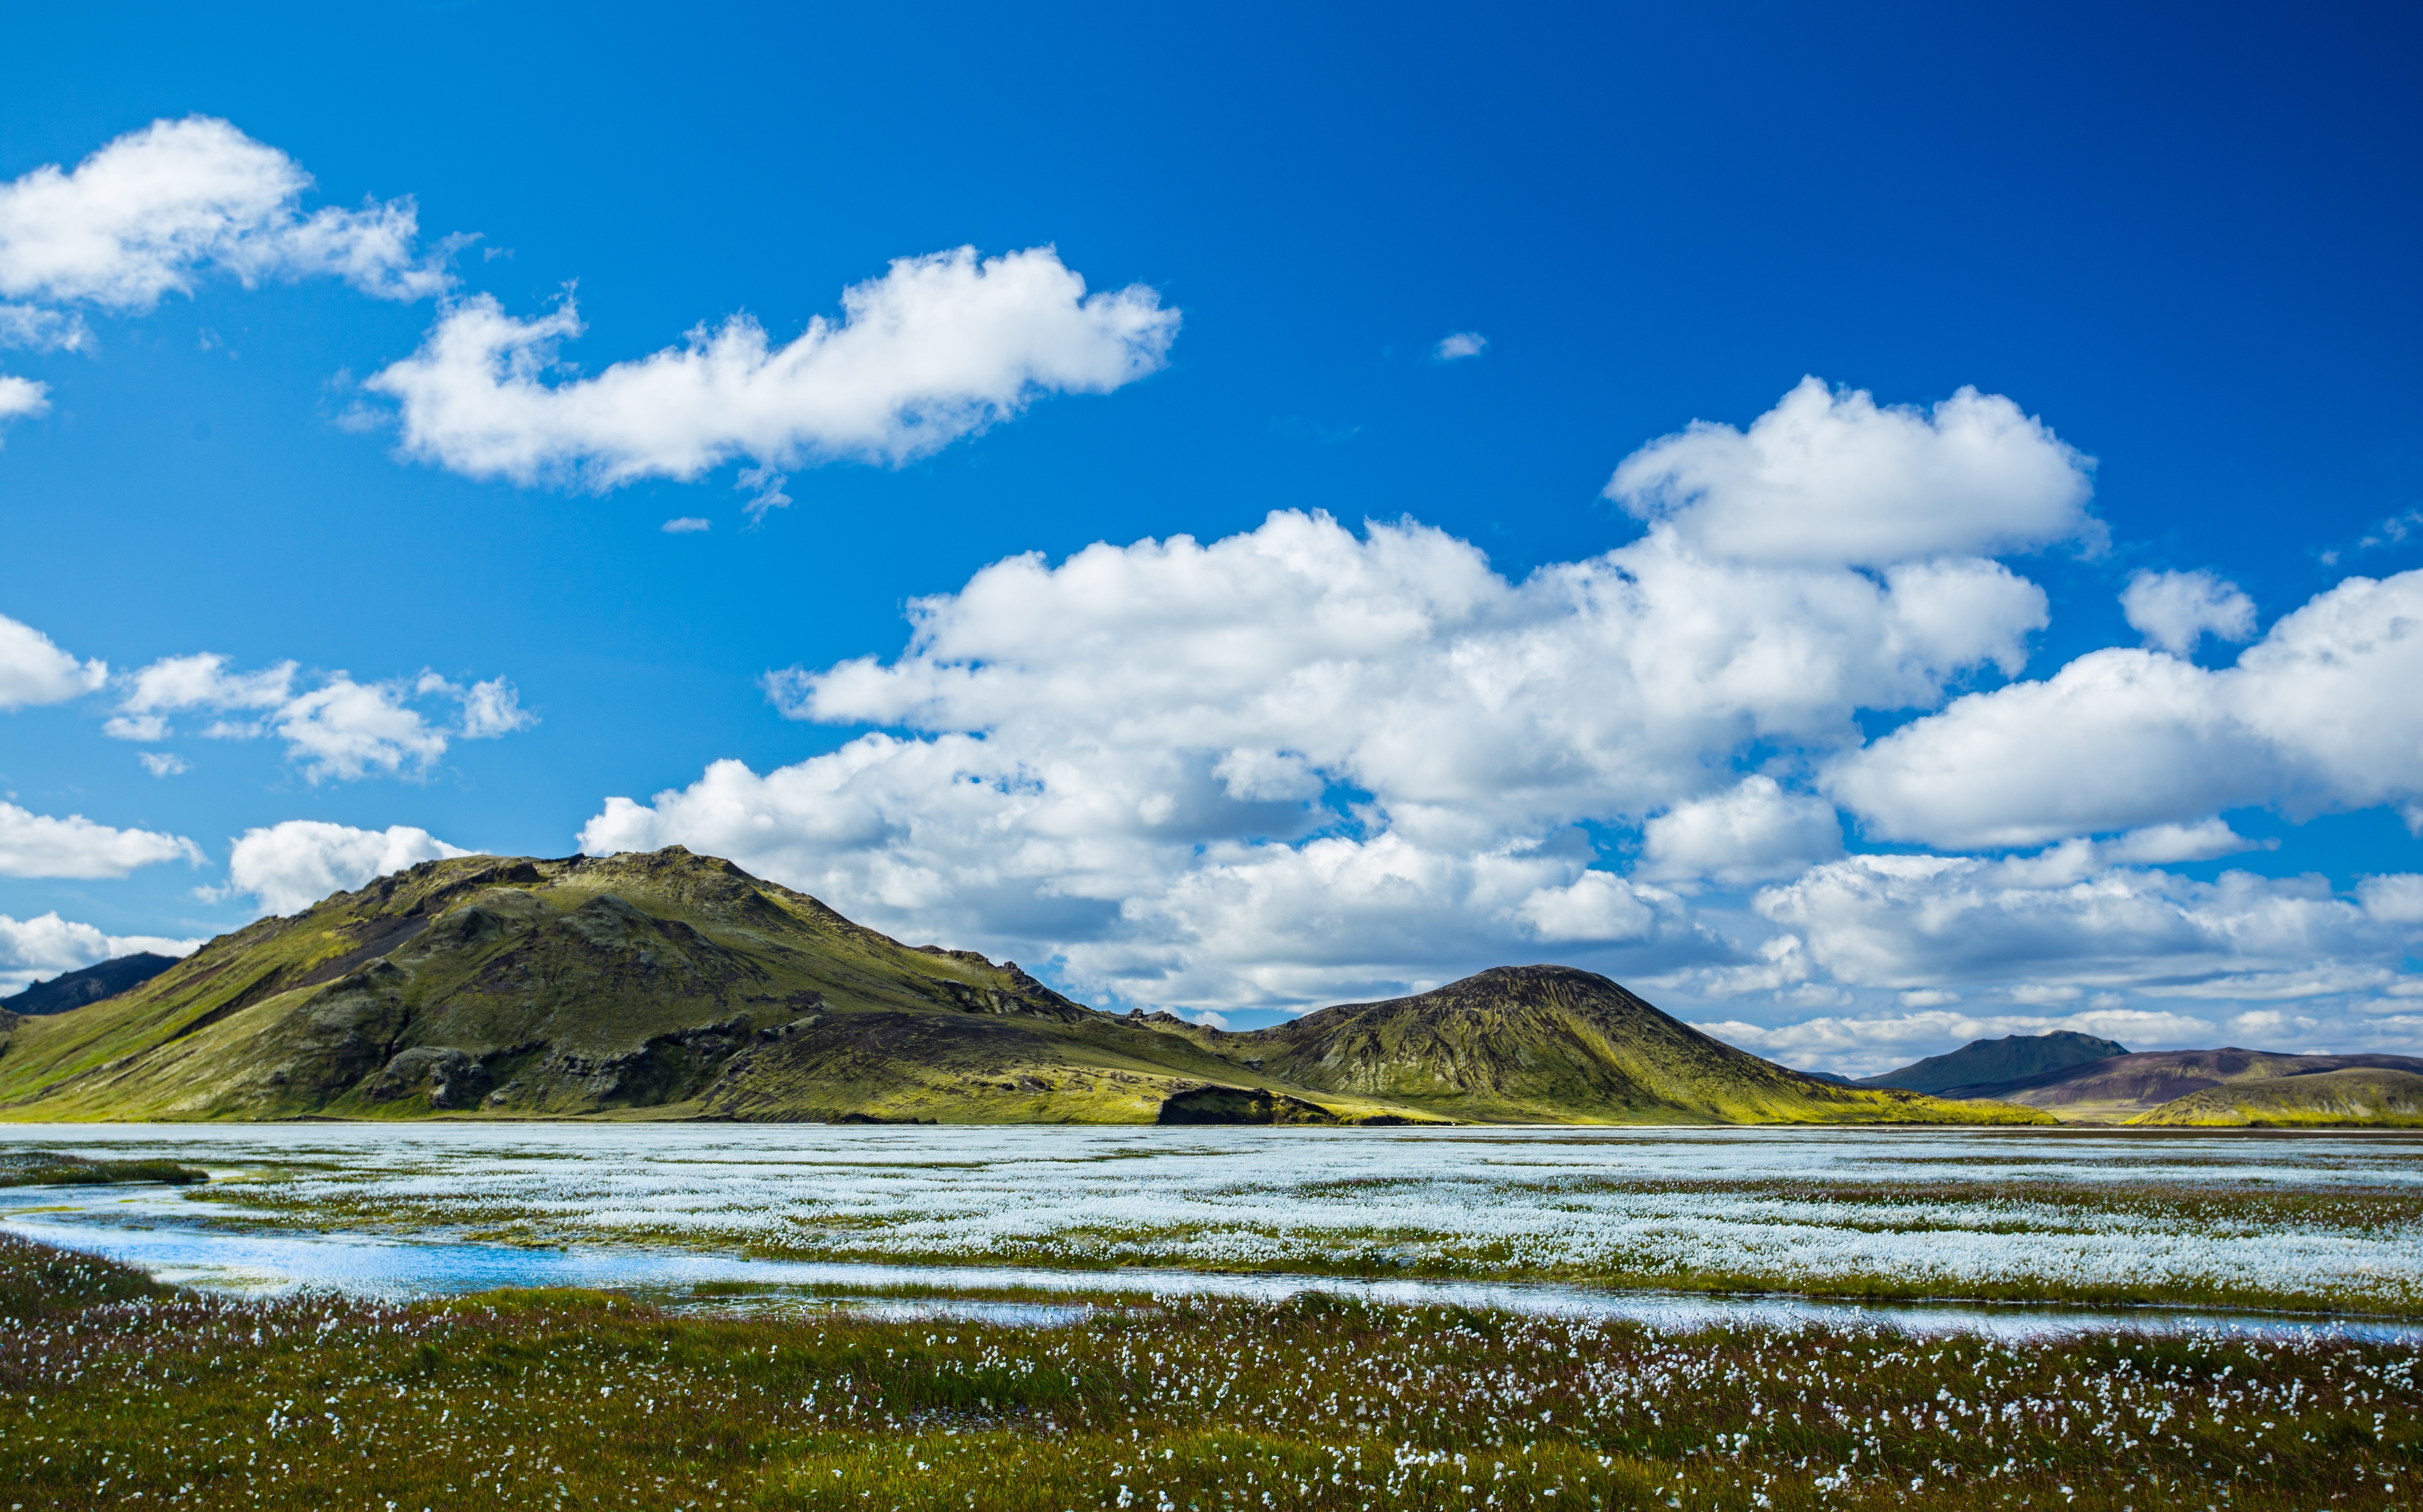 A white meadow by a mountain stream in Iceland.